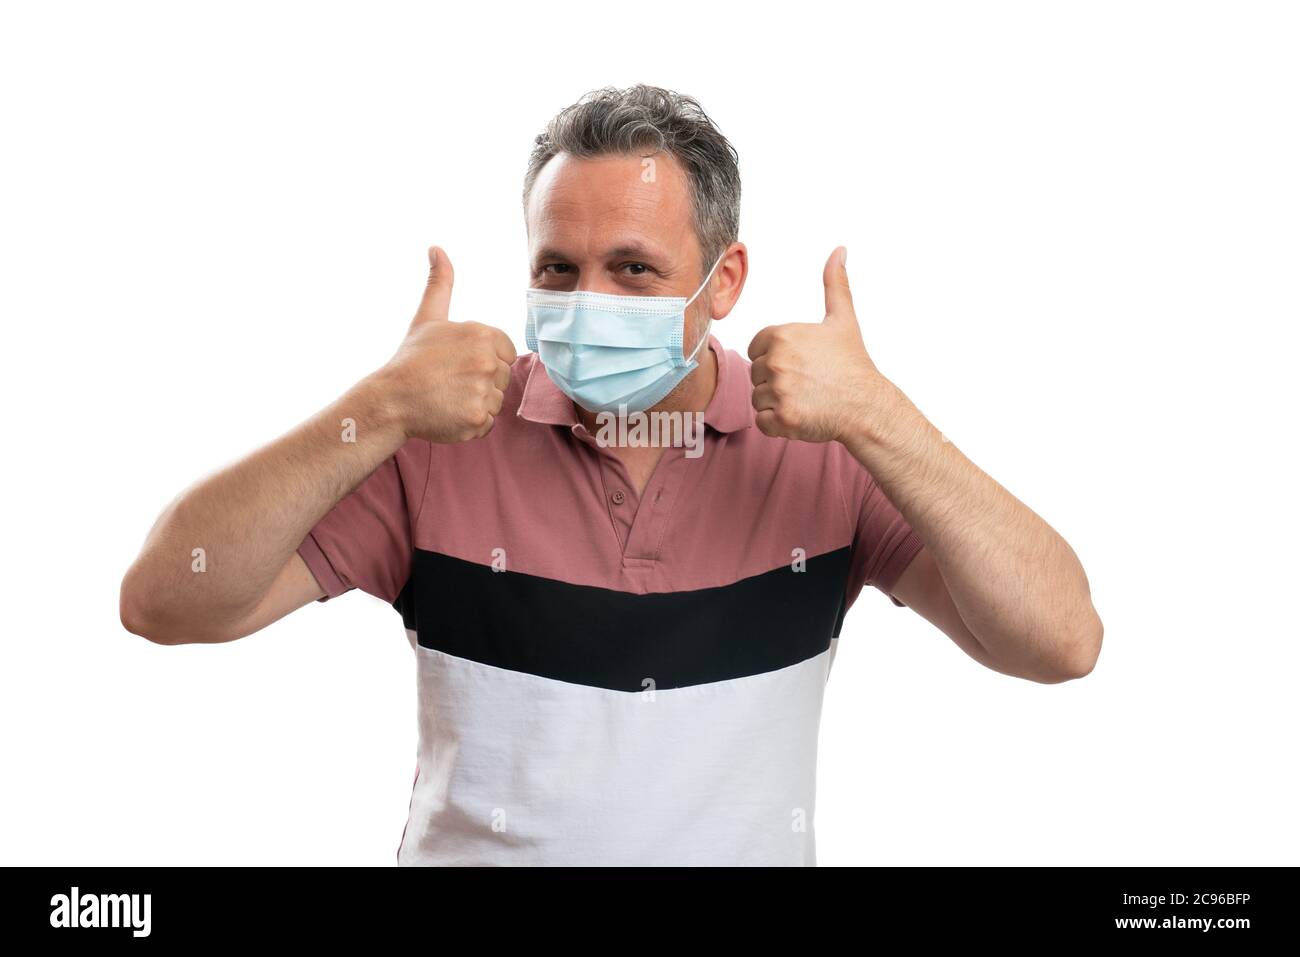 Guy wearing a medical disposable mask showing thumbs-up as good prevention against influenza pandemic and healtchare concept Stock Photo